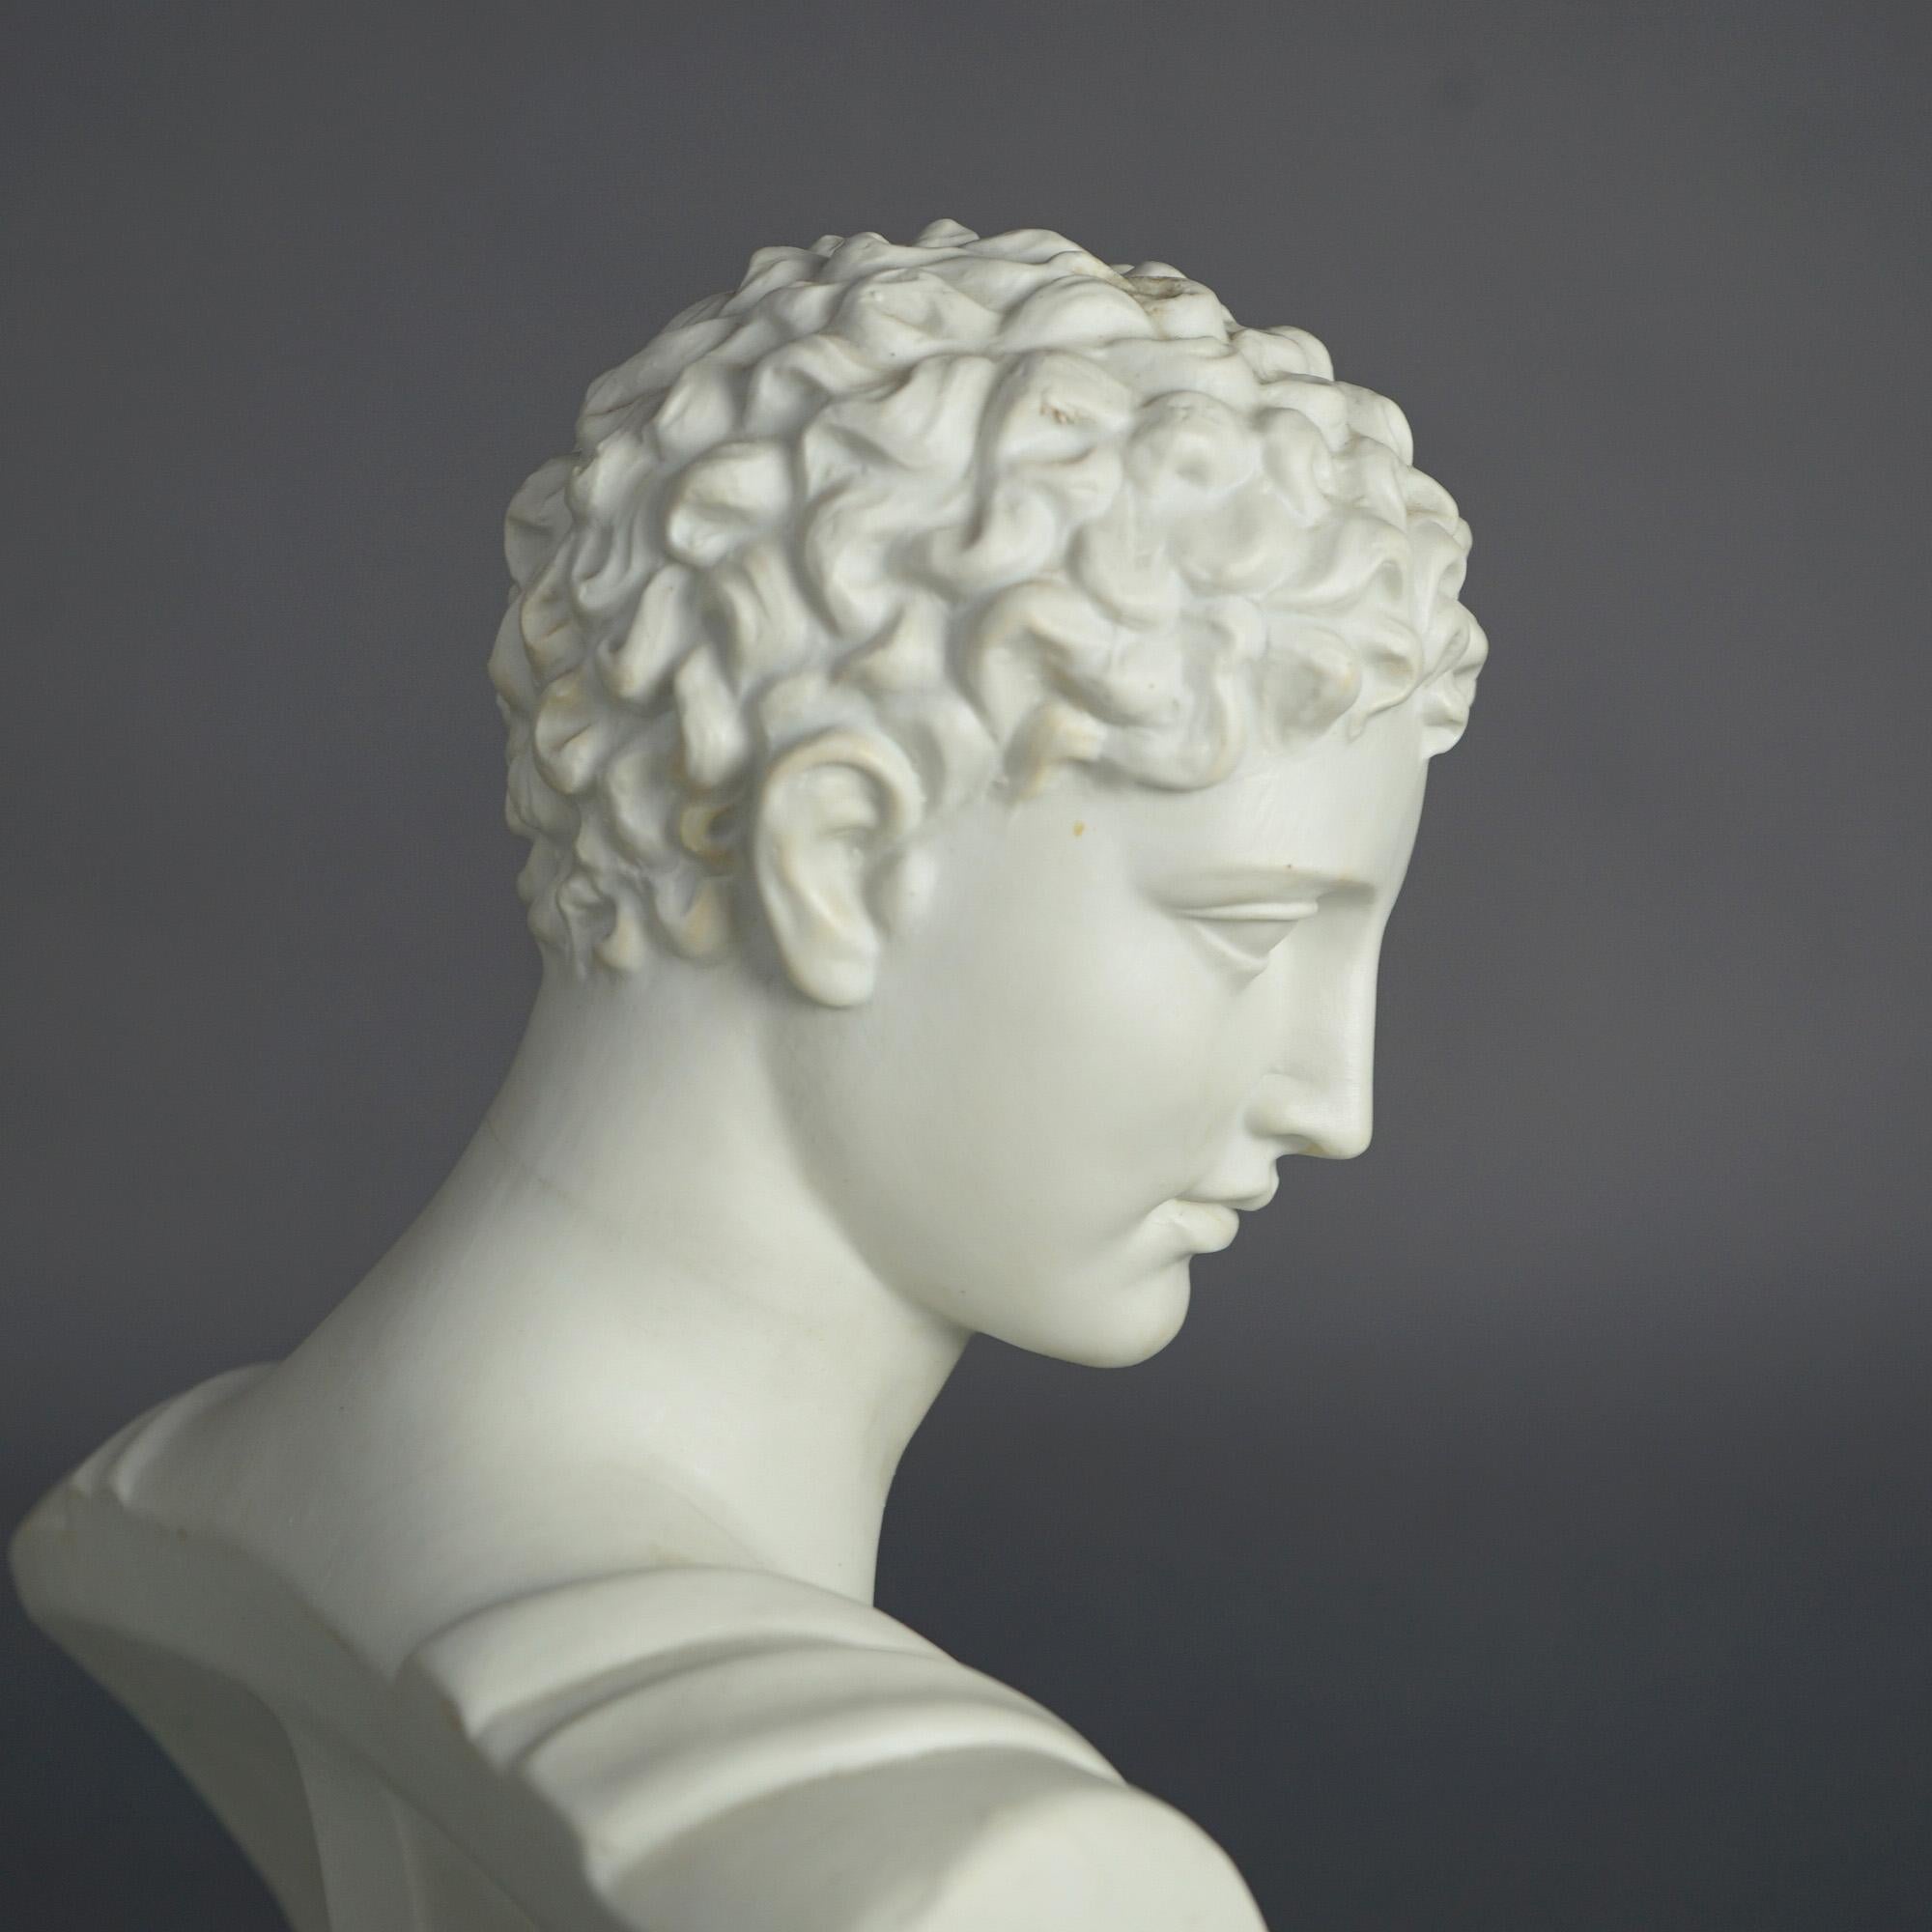 Antique French Neoclassical Parian Porcelain Bust of Michaelangelo's David C1900 For Sale 3